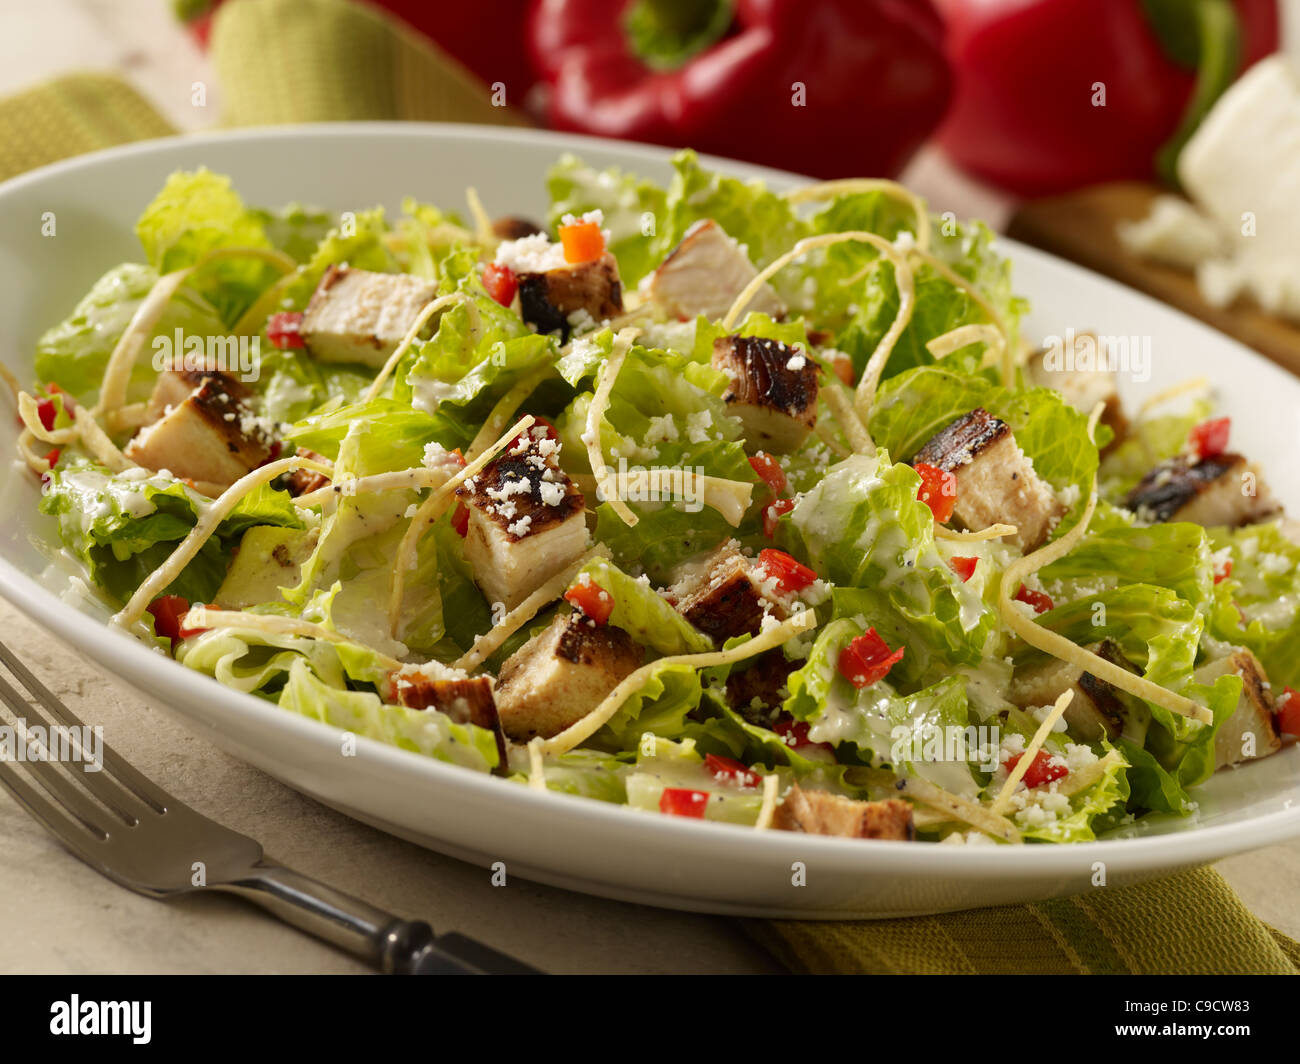 Grilled chicken caesar salad in a white bowl Stock Photo